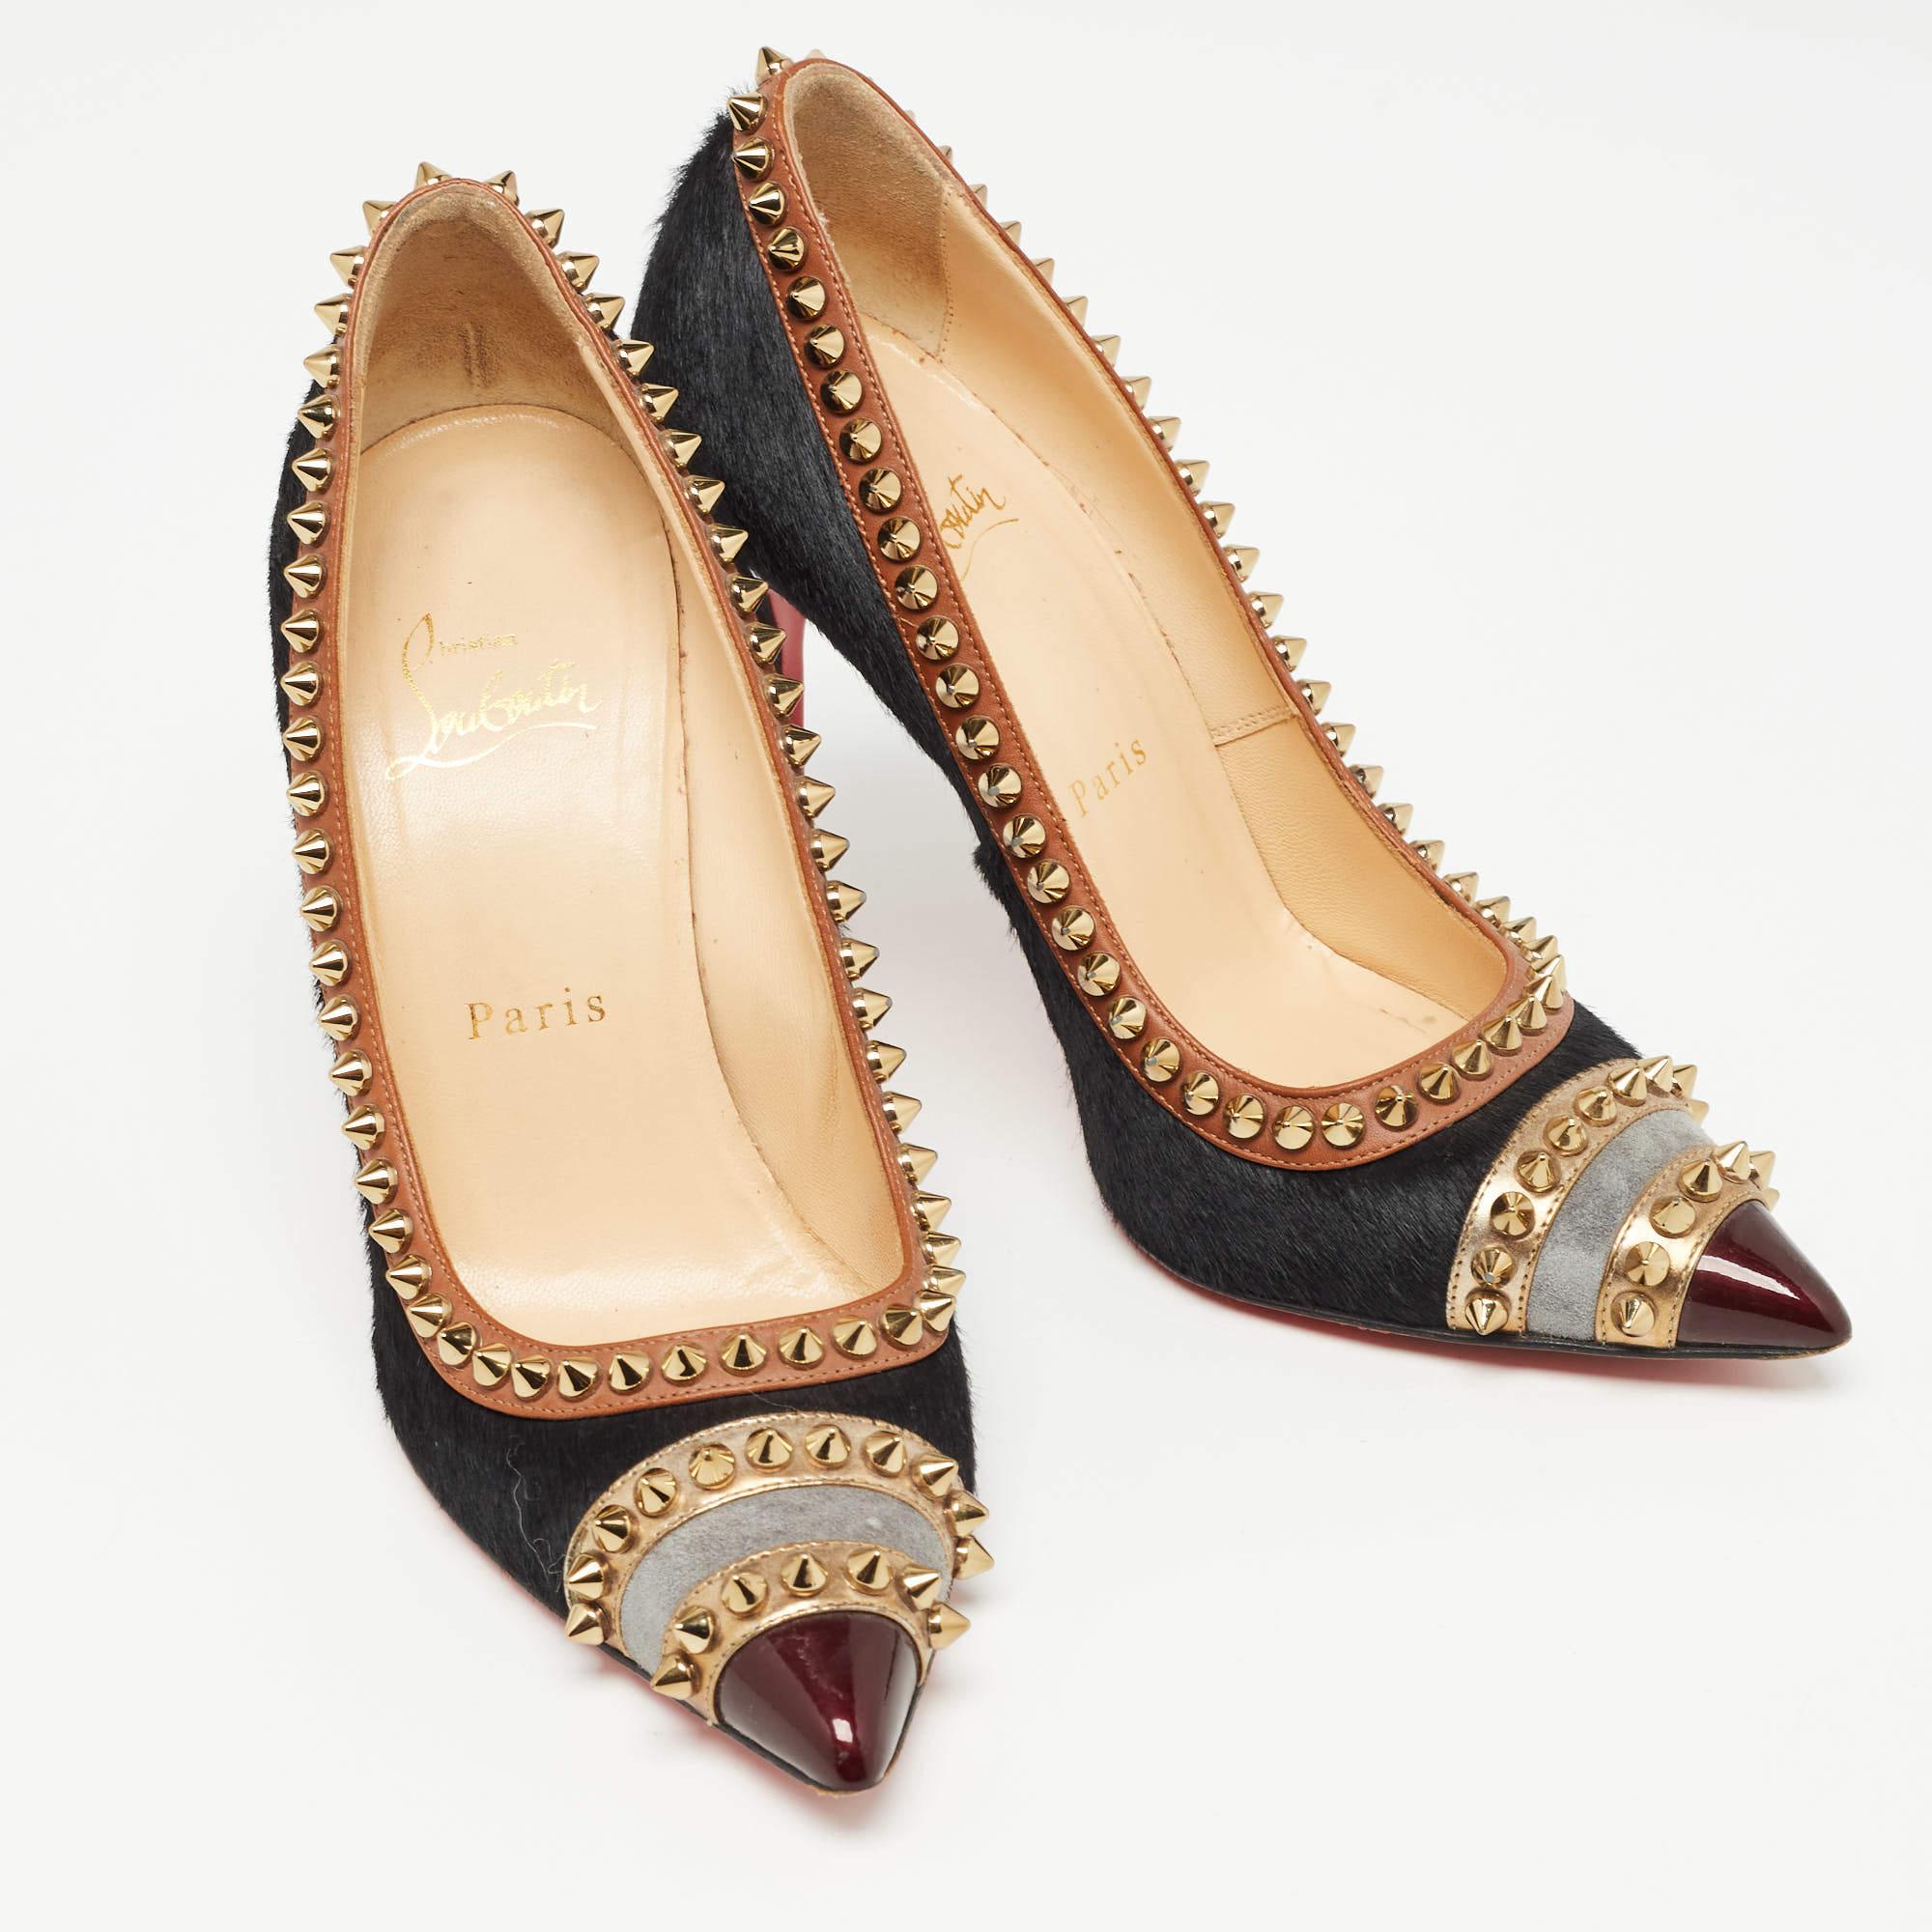 Christian Louboutin Black Calf Hair and Leather Malabar Hill Pumps Size 36 In Good Condition For Sale In Dubai, Al Qouz 2